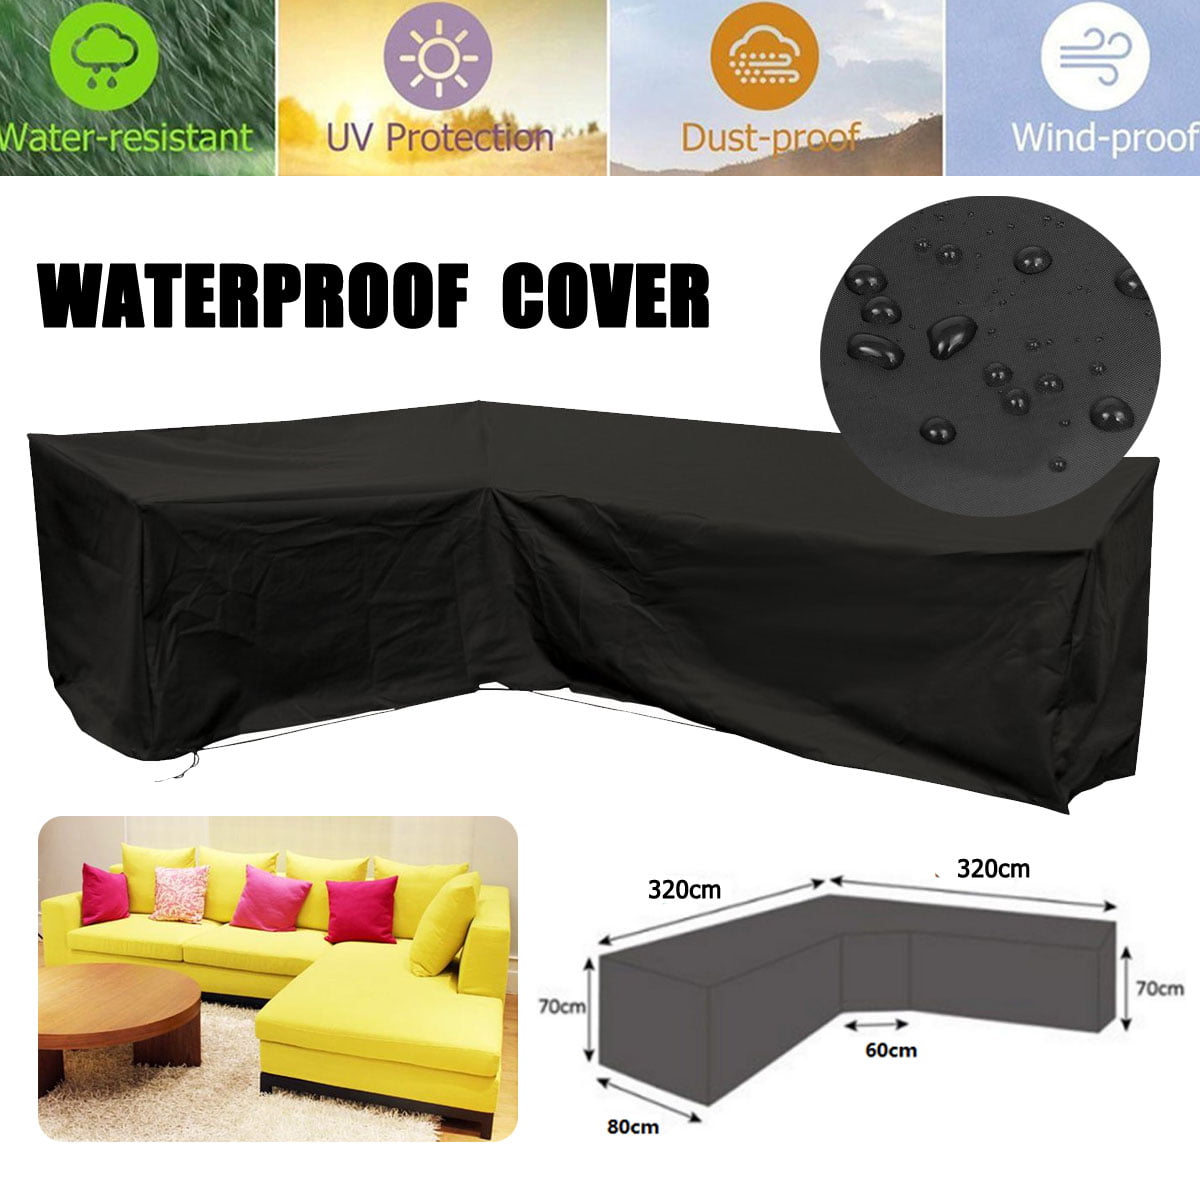 L Shaped Patio Sofa Cover Outdoor, L Shaped Patio Furniture Cover Canada